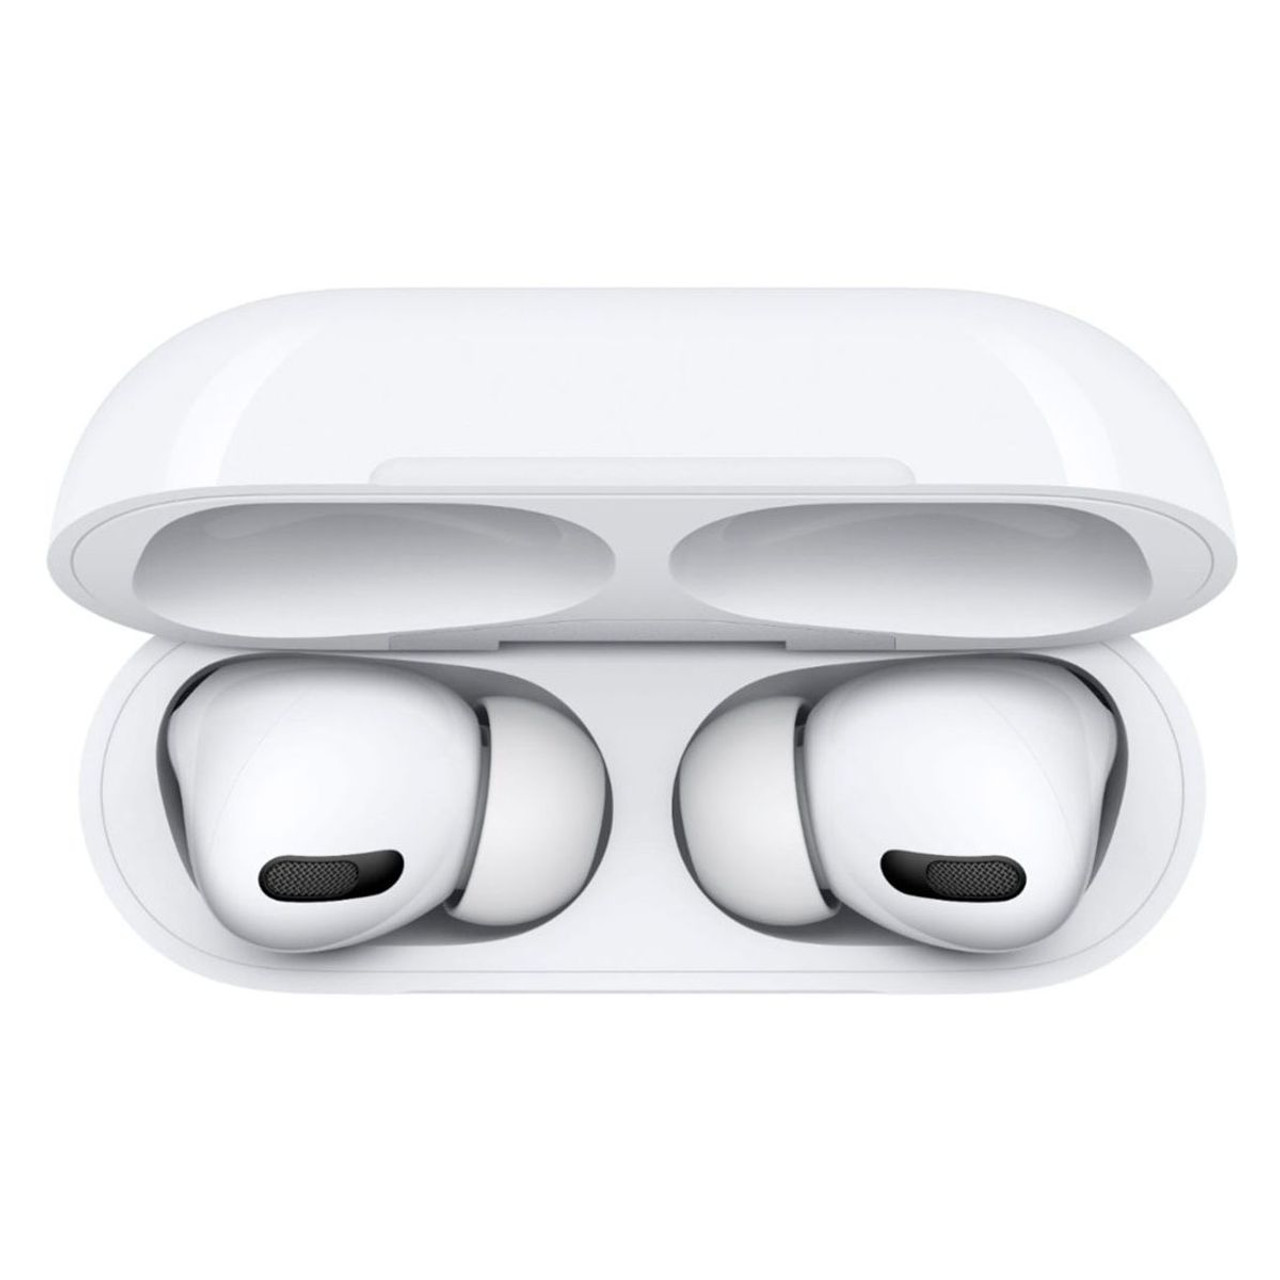 Apple AirPods Pro Wireless In-Ear Headphones product image